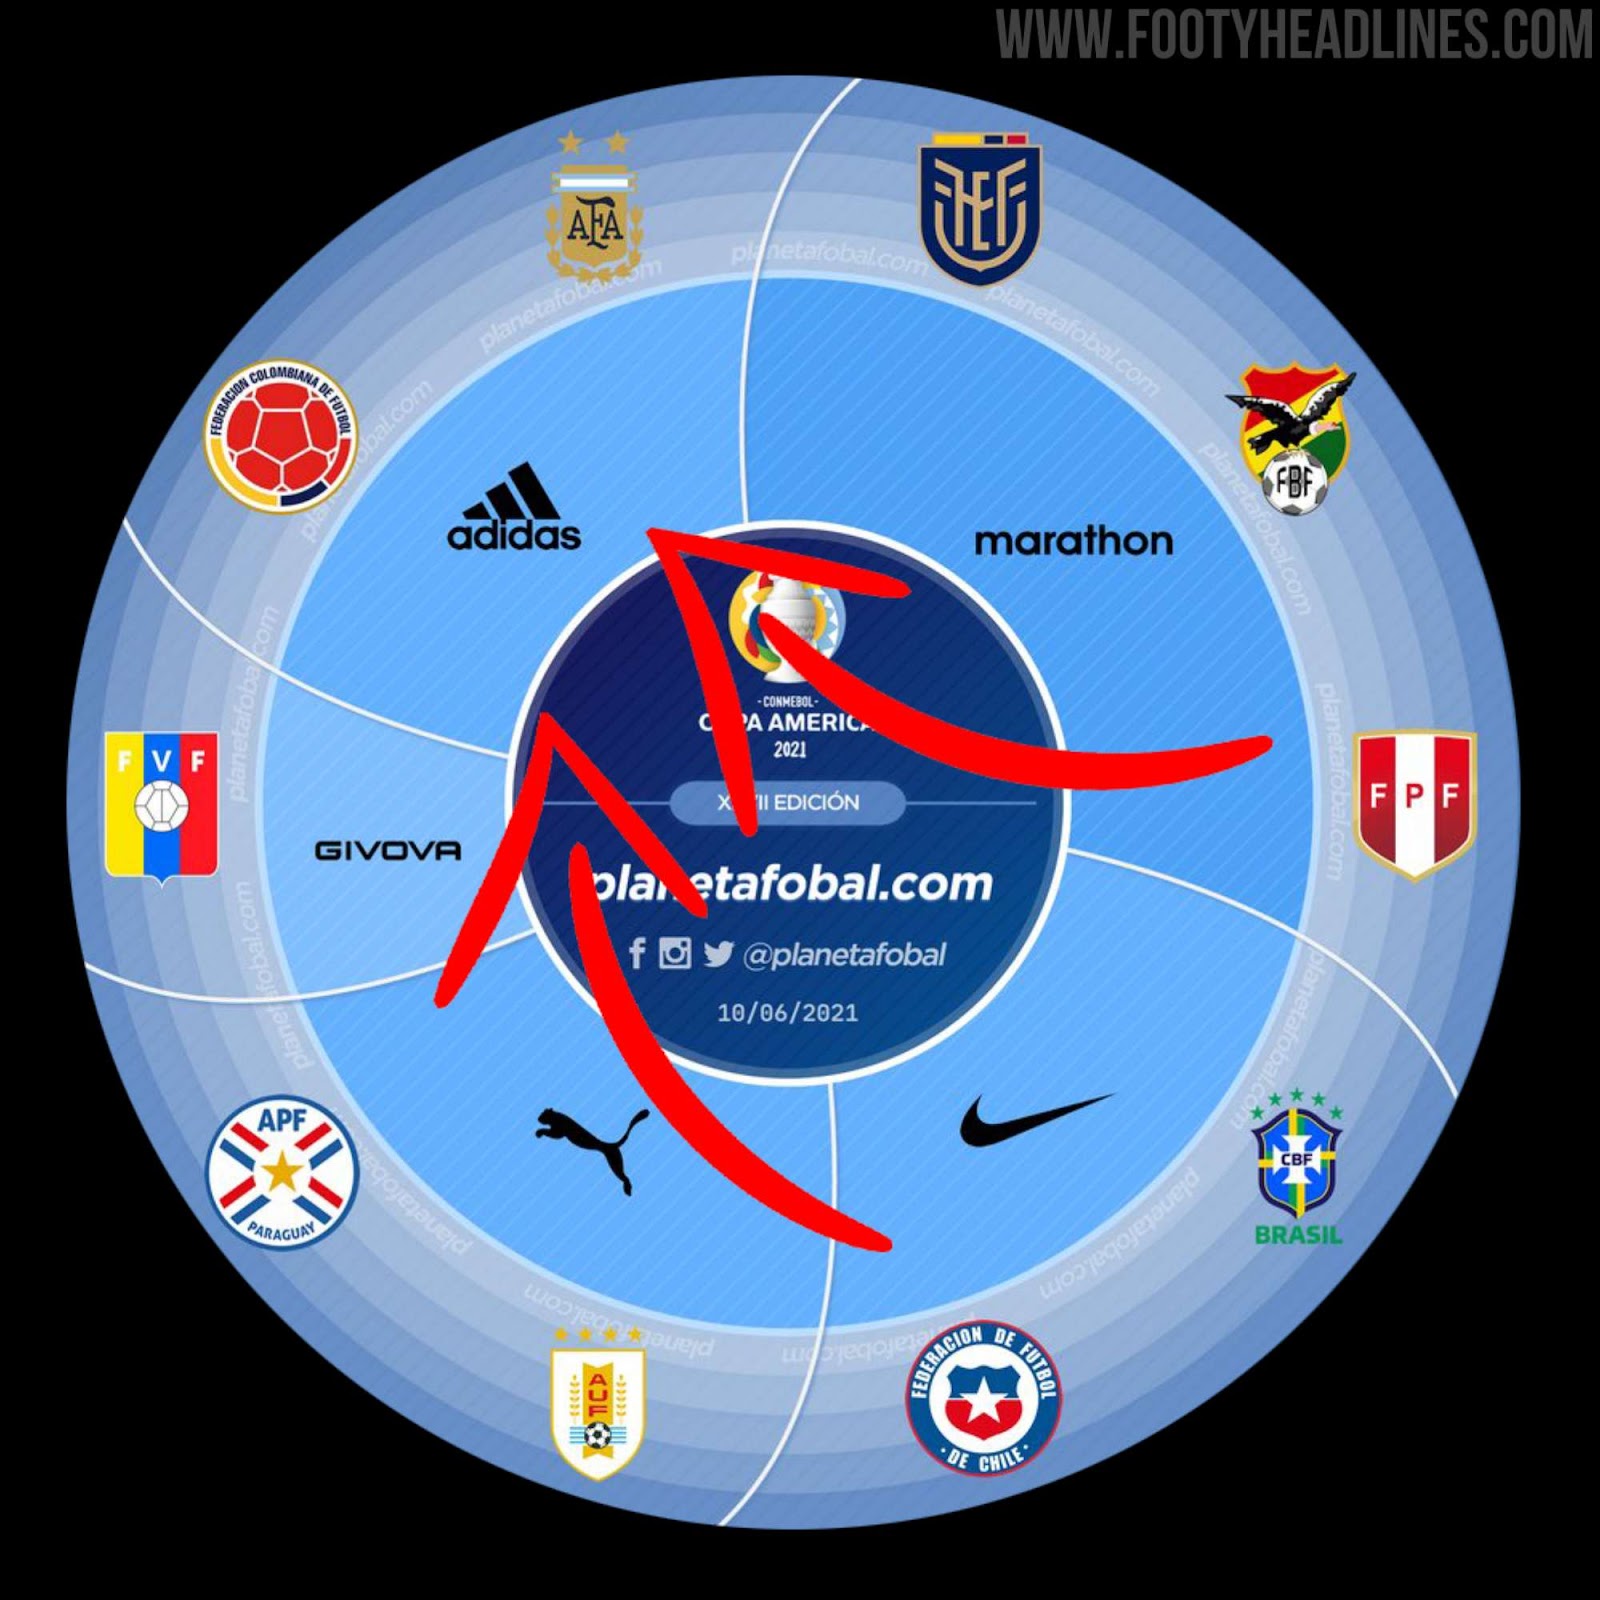 How South American teams in UEFA Nations League would work